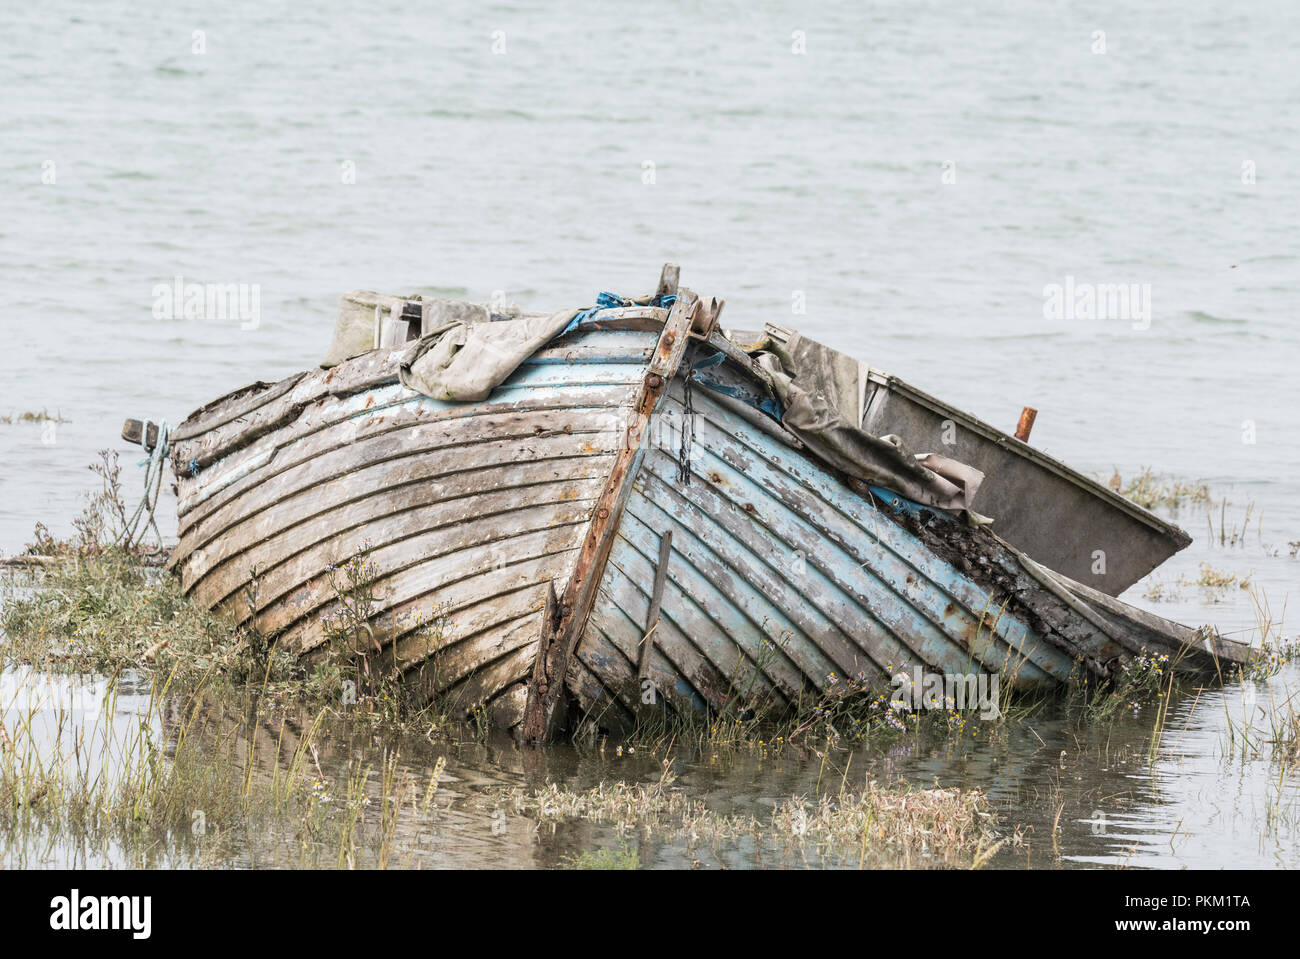 An abandoned wooden rowing boat on the River Stour Stock Photo